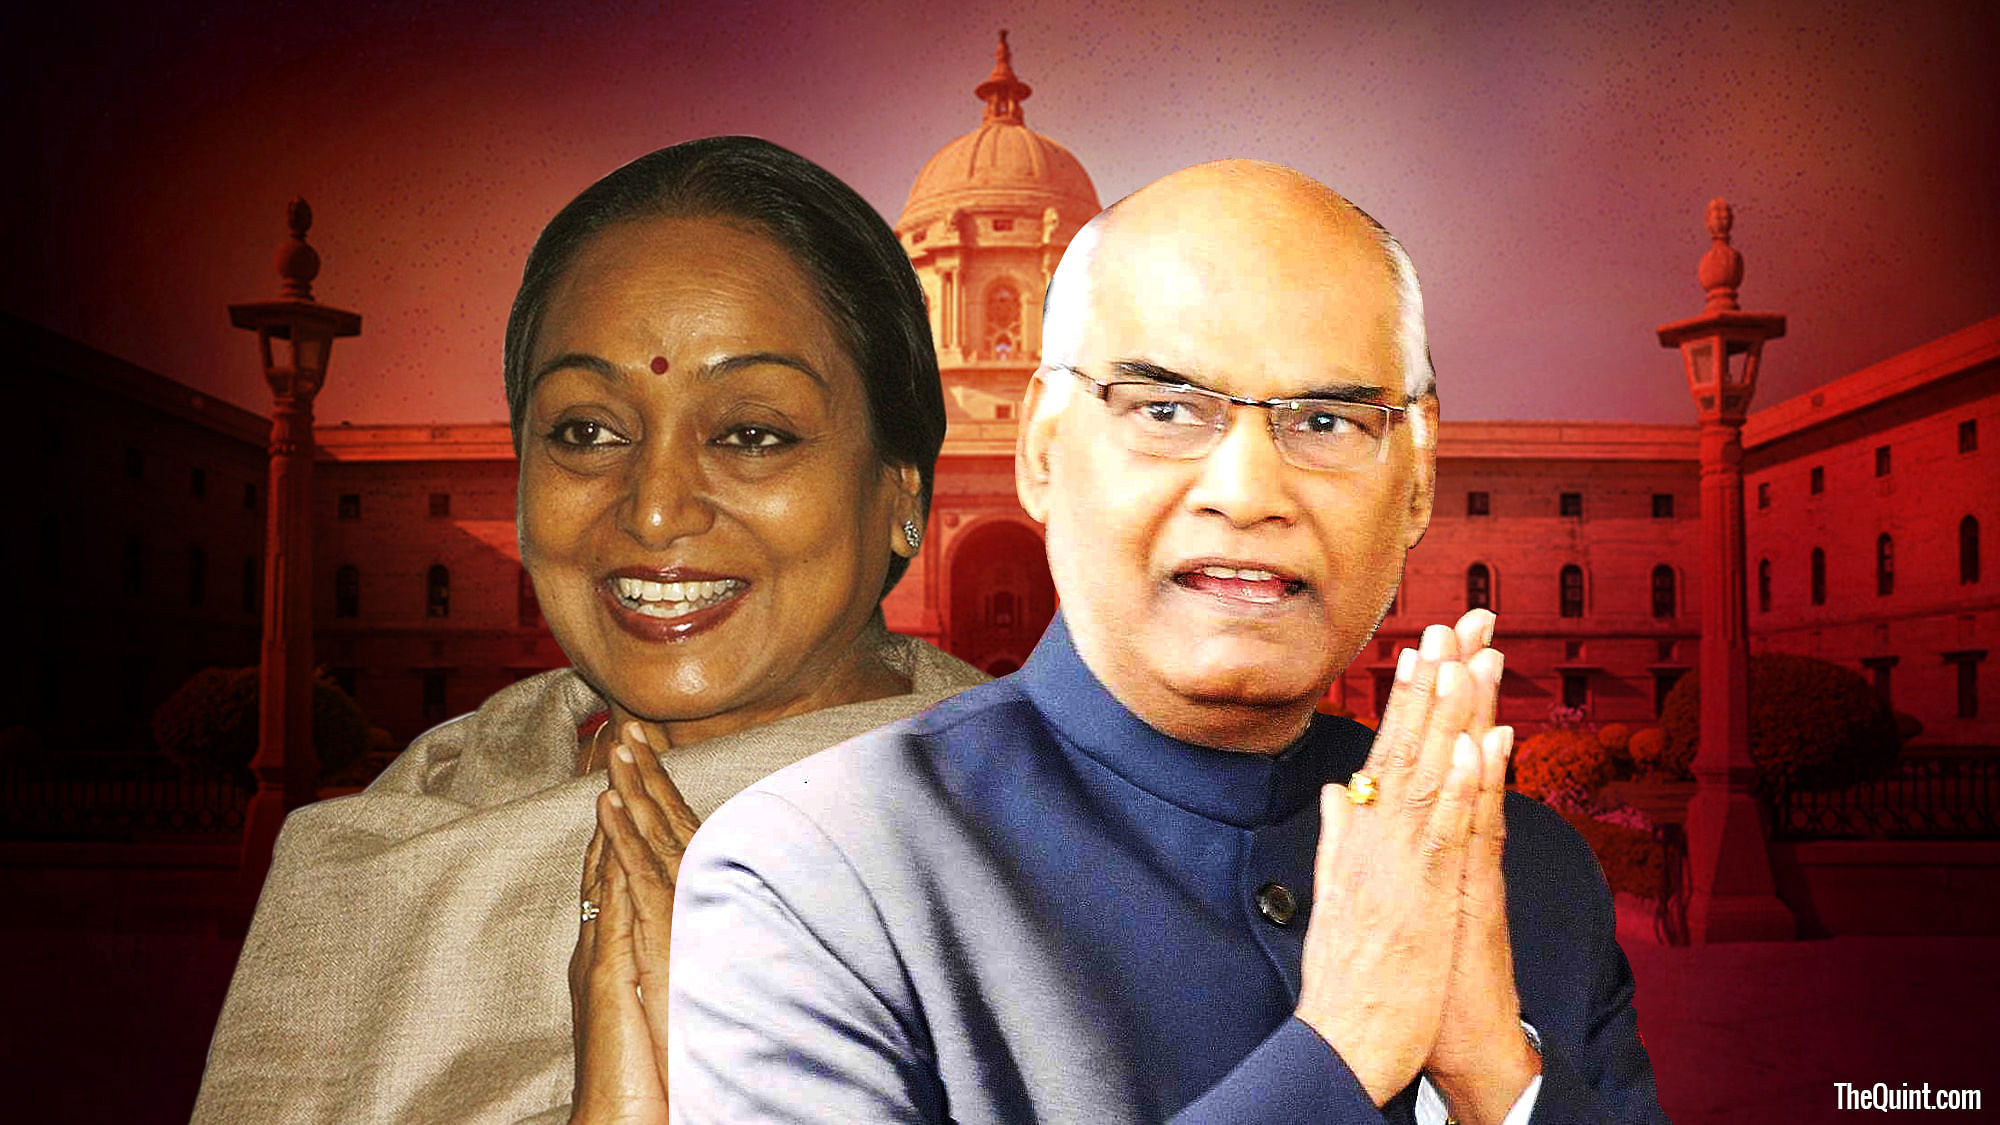 It’s Dalit versus Dalit in the race to Rashtrapati Bhavan as the Congress-led Opposition parties chose former Lok Sabha speaker Meira Kumar as their nominee.&nbsp;